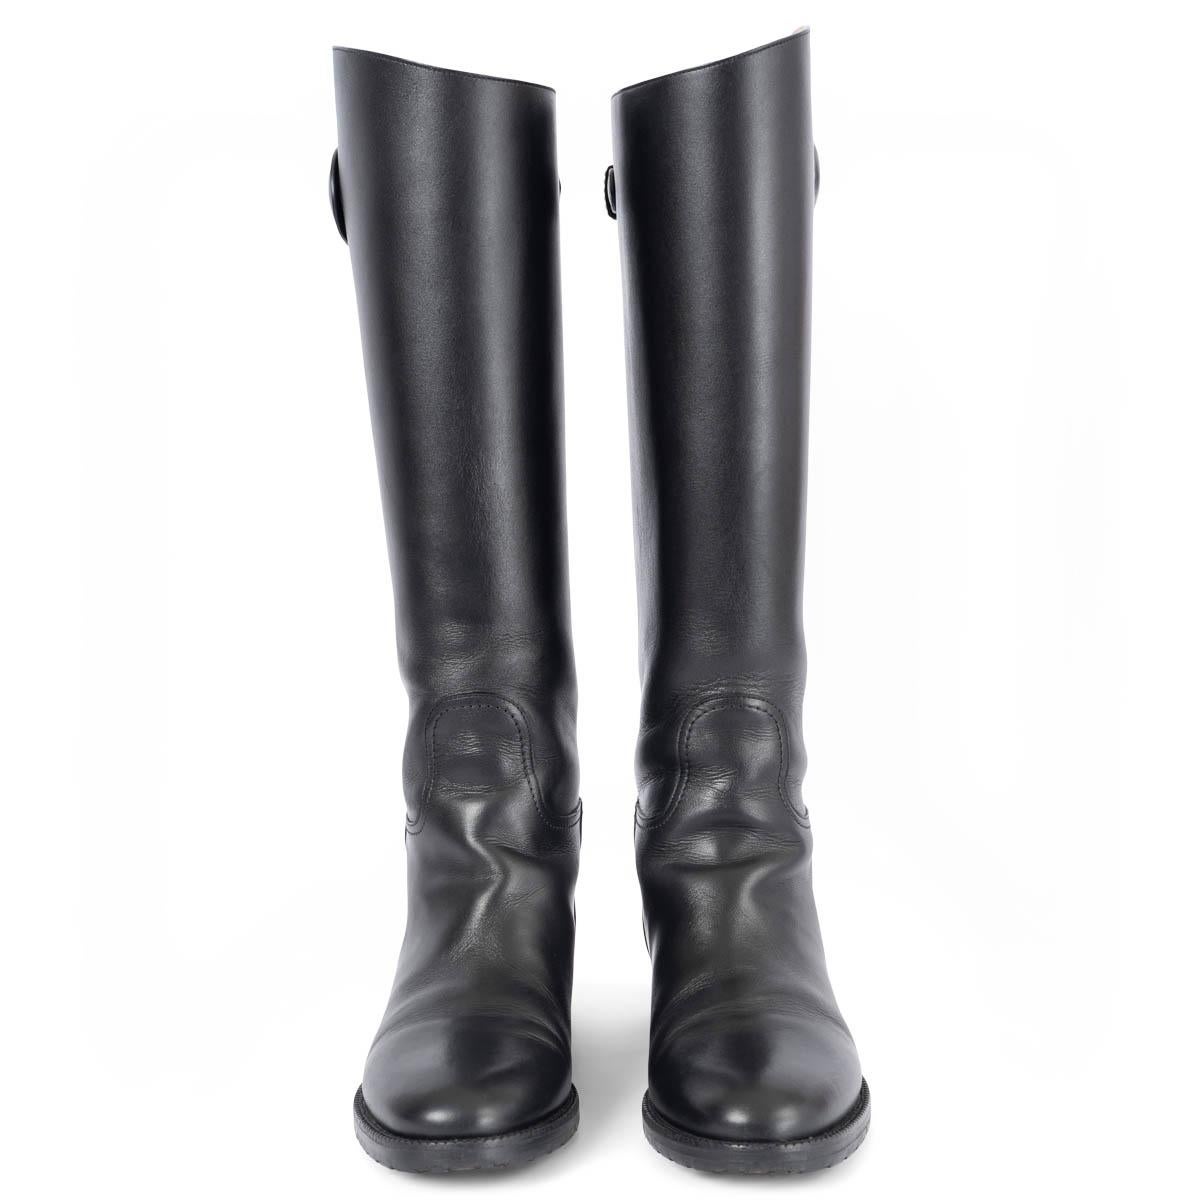 100% authentic Christian Dior Diorable knee high riding boots in black calfskin features a strap adorned with a gold-finish 'CD' buckle. Have been worn and are in excellent condition. Come with dust bag. 

Measurements
Model	KCH365VEAS900
Imprinted